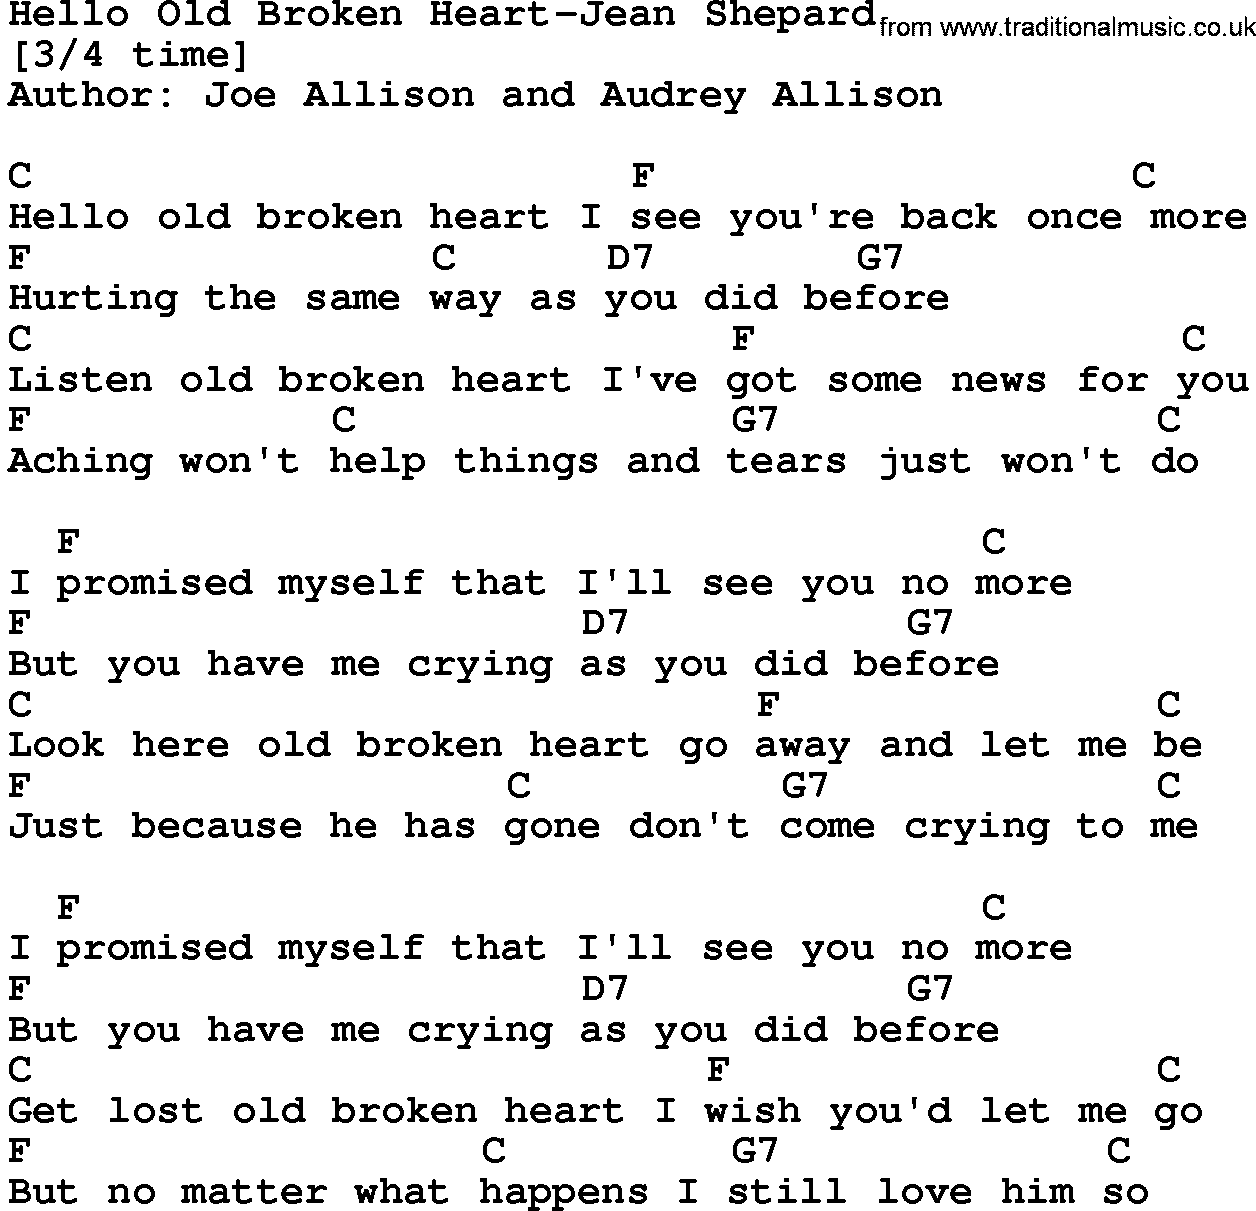 Country music song: Hello Old Broken Heart-Jean Shepard lyrics and chords